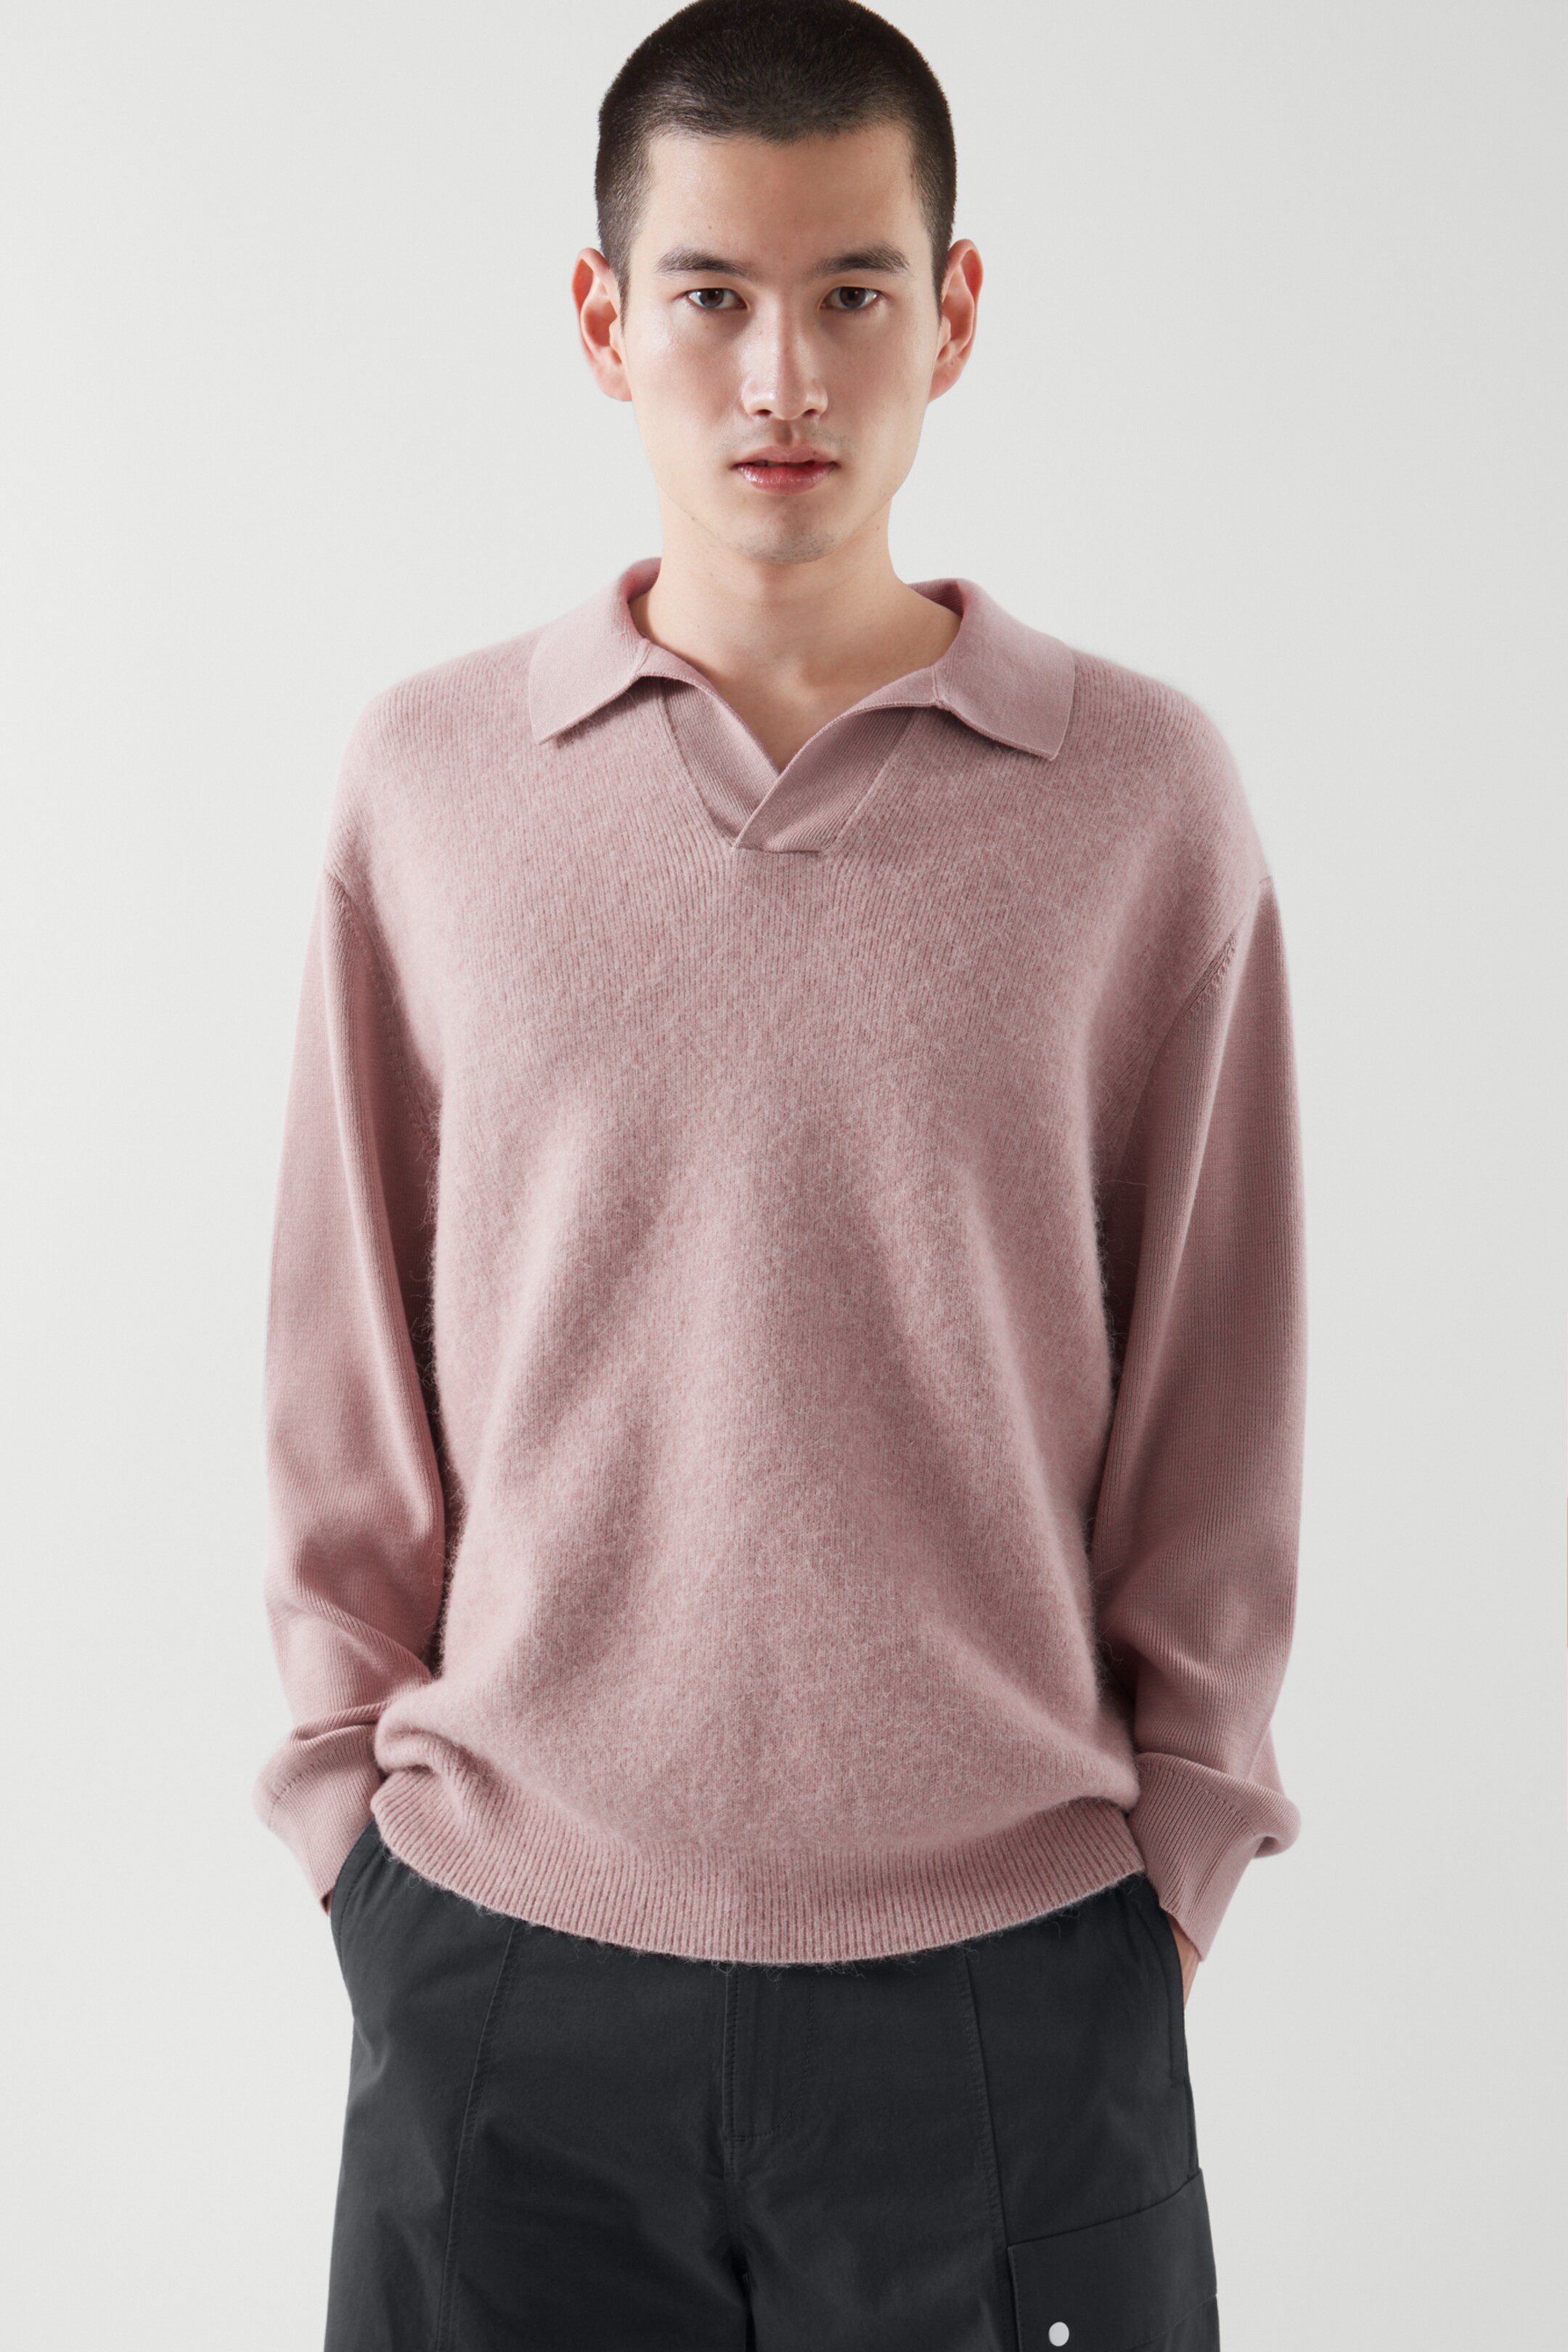 Top image of cos OPEN COLLAR LONG-SLEEVE POLO SHIRT in DUSTY PINK